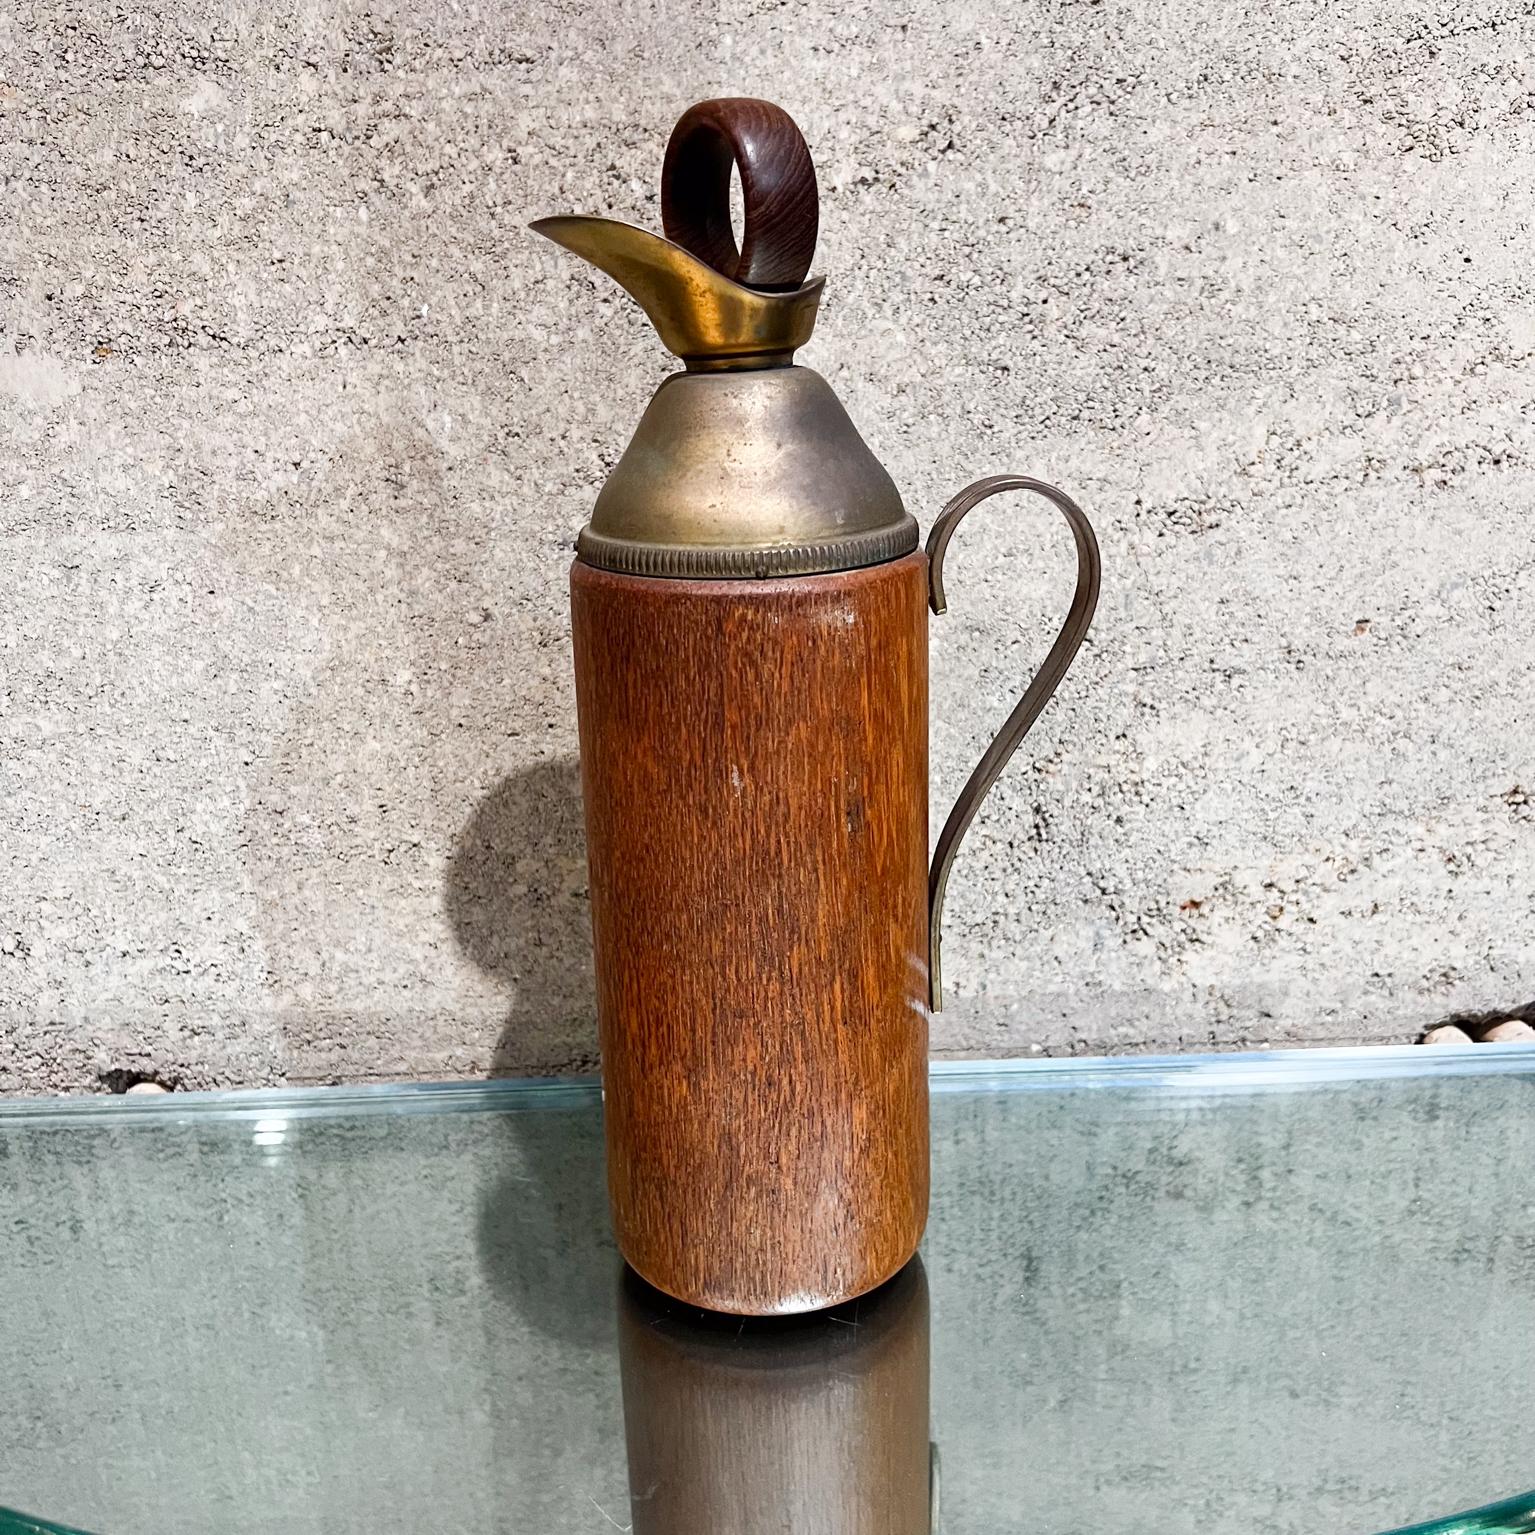 1950s Italian pitcher (carafe thermos) by Aldo Tura ITALY
Designed in Brass and Teakwood.
Unmarked.
Measures: 12.5 tall x 3.75 diameter x 5.25 depth
Brass & wood have vintage patina. 
Original cork is missing and replaced with vintage